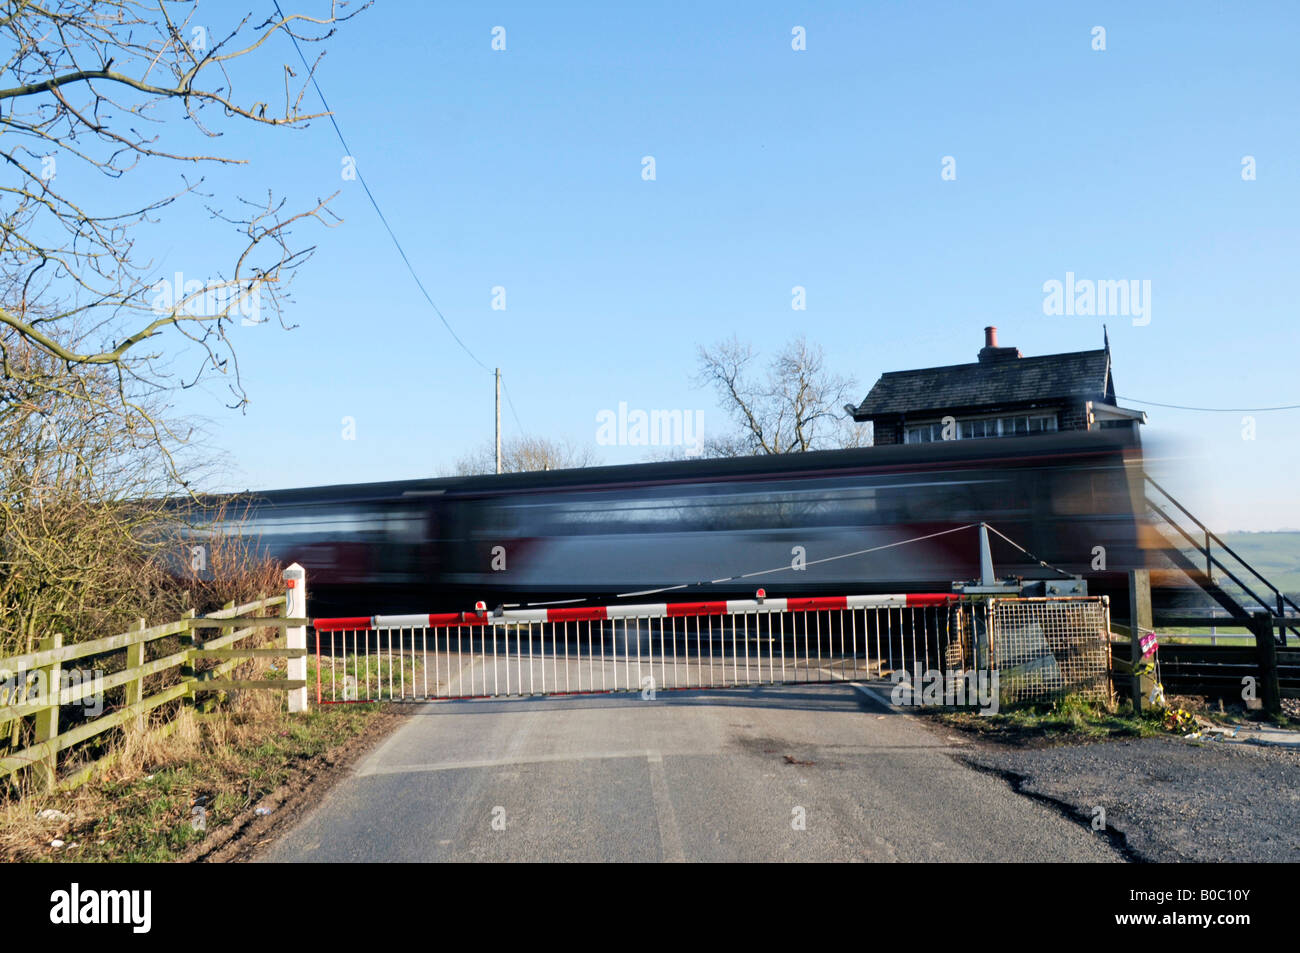 Train on Barrier Railway Crossing, North Yorkshire, England Stock Photo